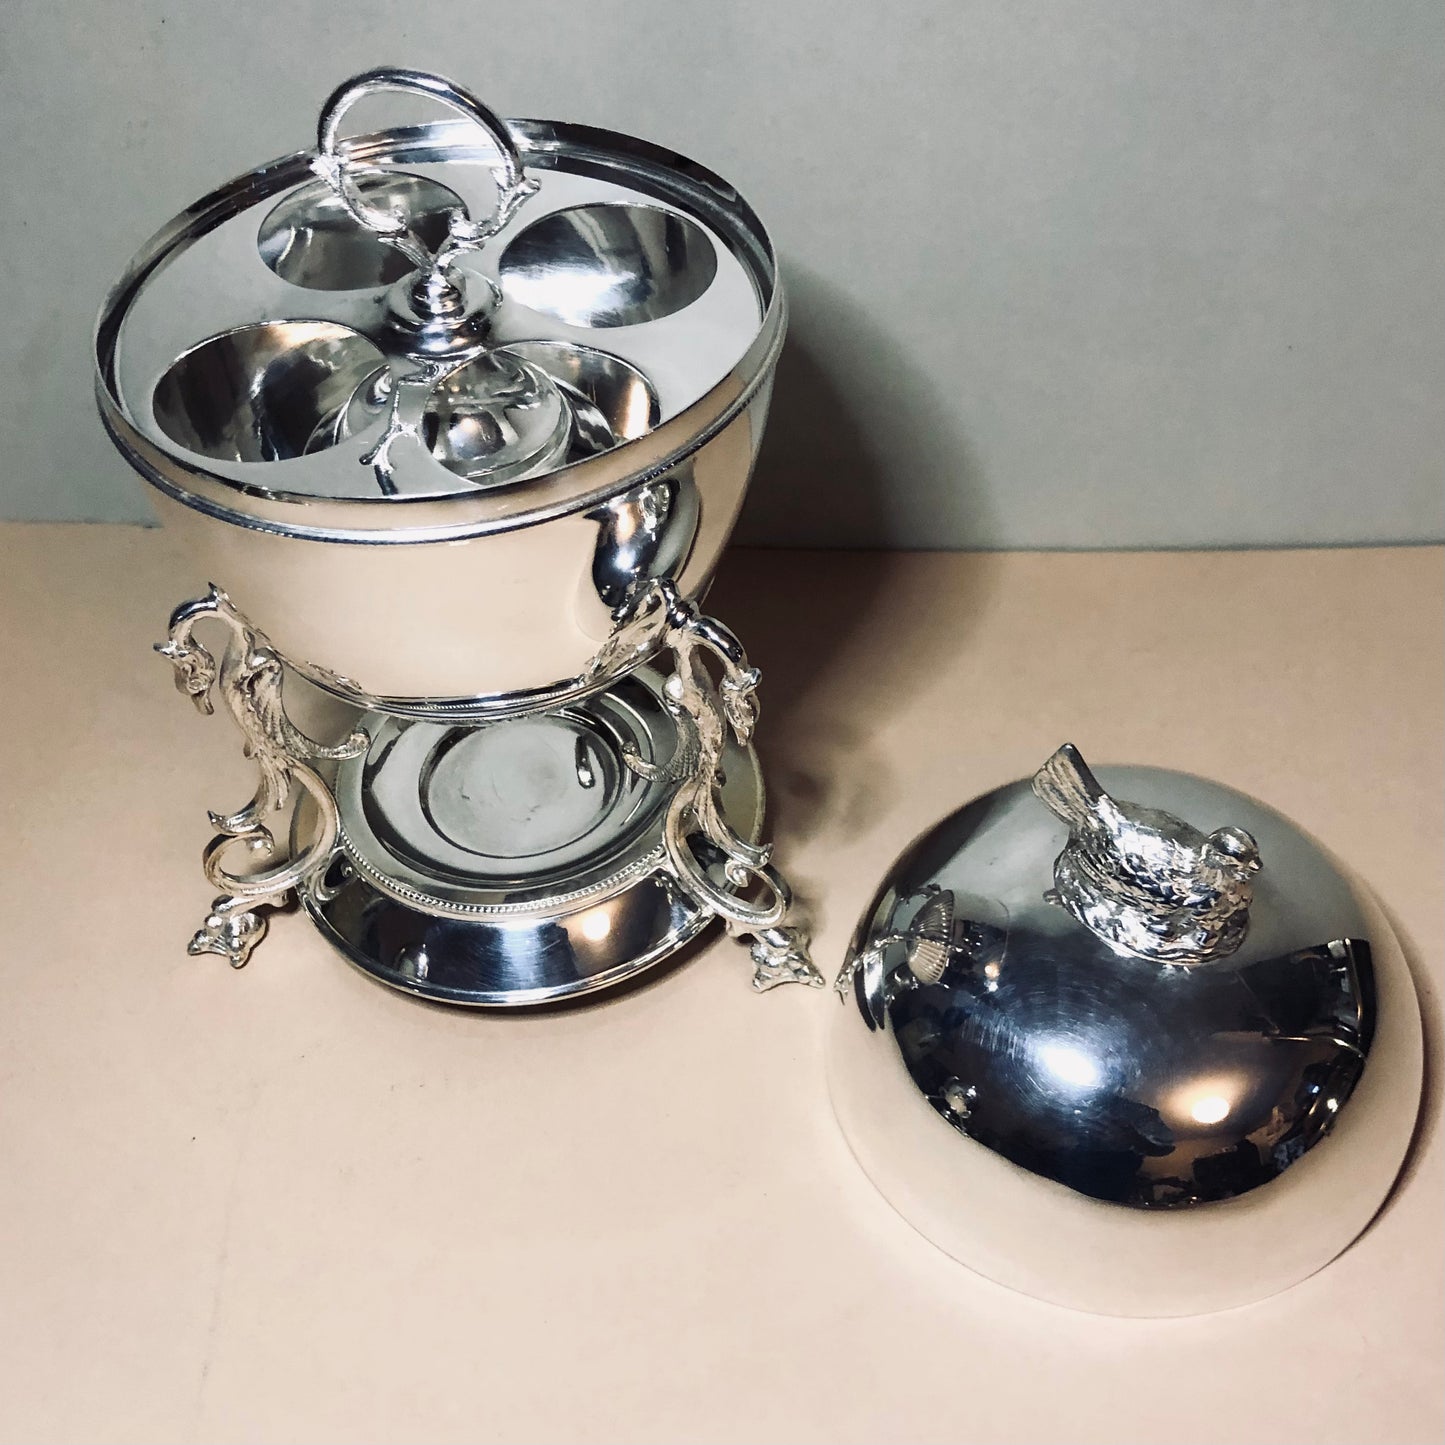 The Groom Heidi - Victorian Silver Egg Coddler with Hen Finial